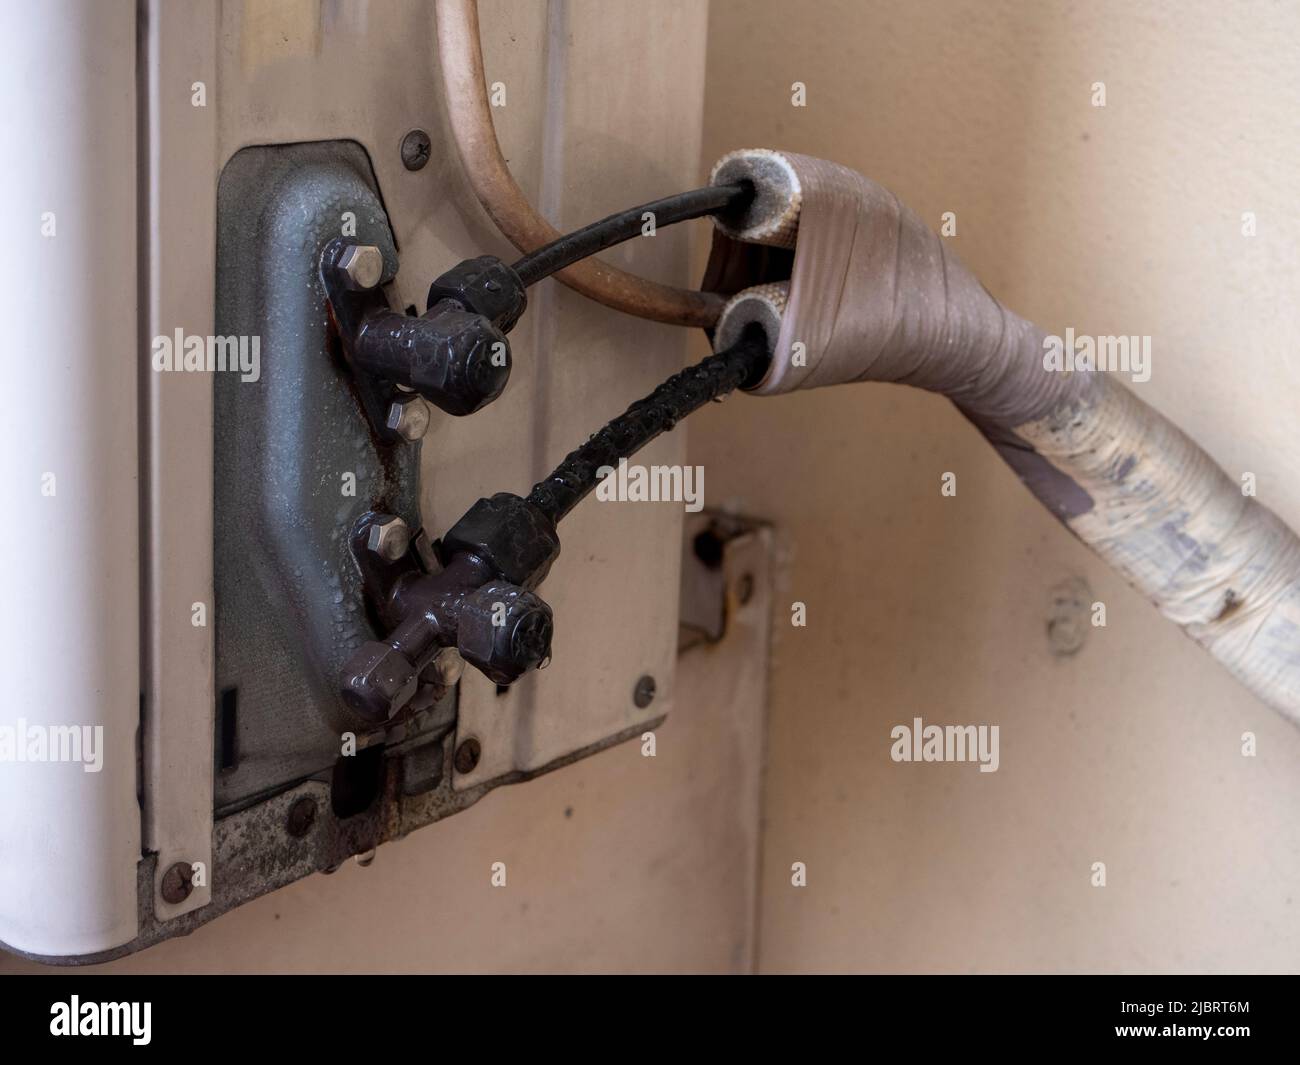 AC outdoor compressor pipe connection Stock Photo